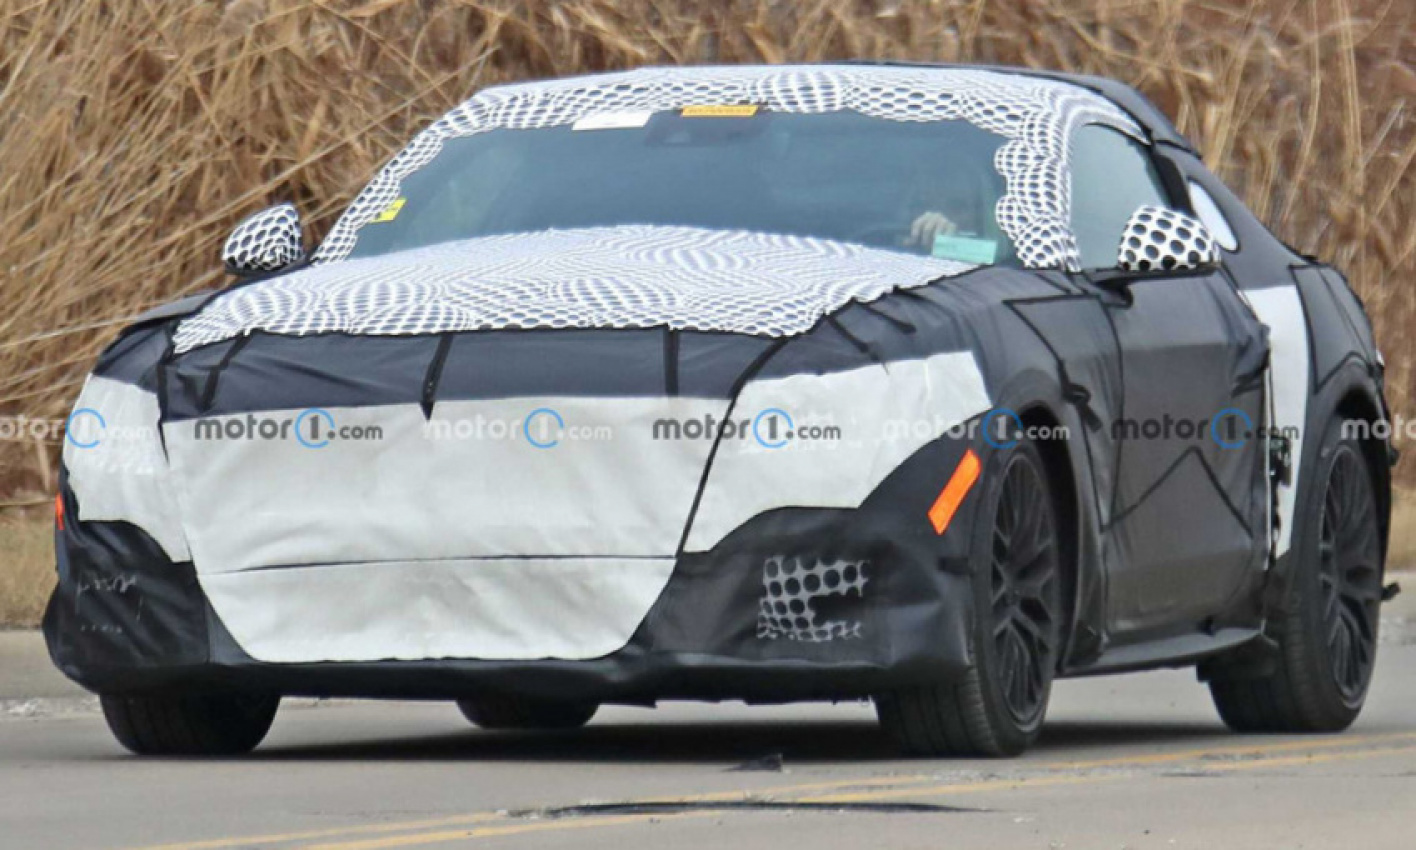 all news, autos, cars, ford, ford mustang, mustang, seventh gen ford mustang, spy, spy shots, seventh gen ford mustang boasts softer lines in teased front end image